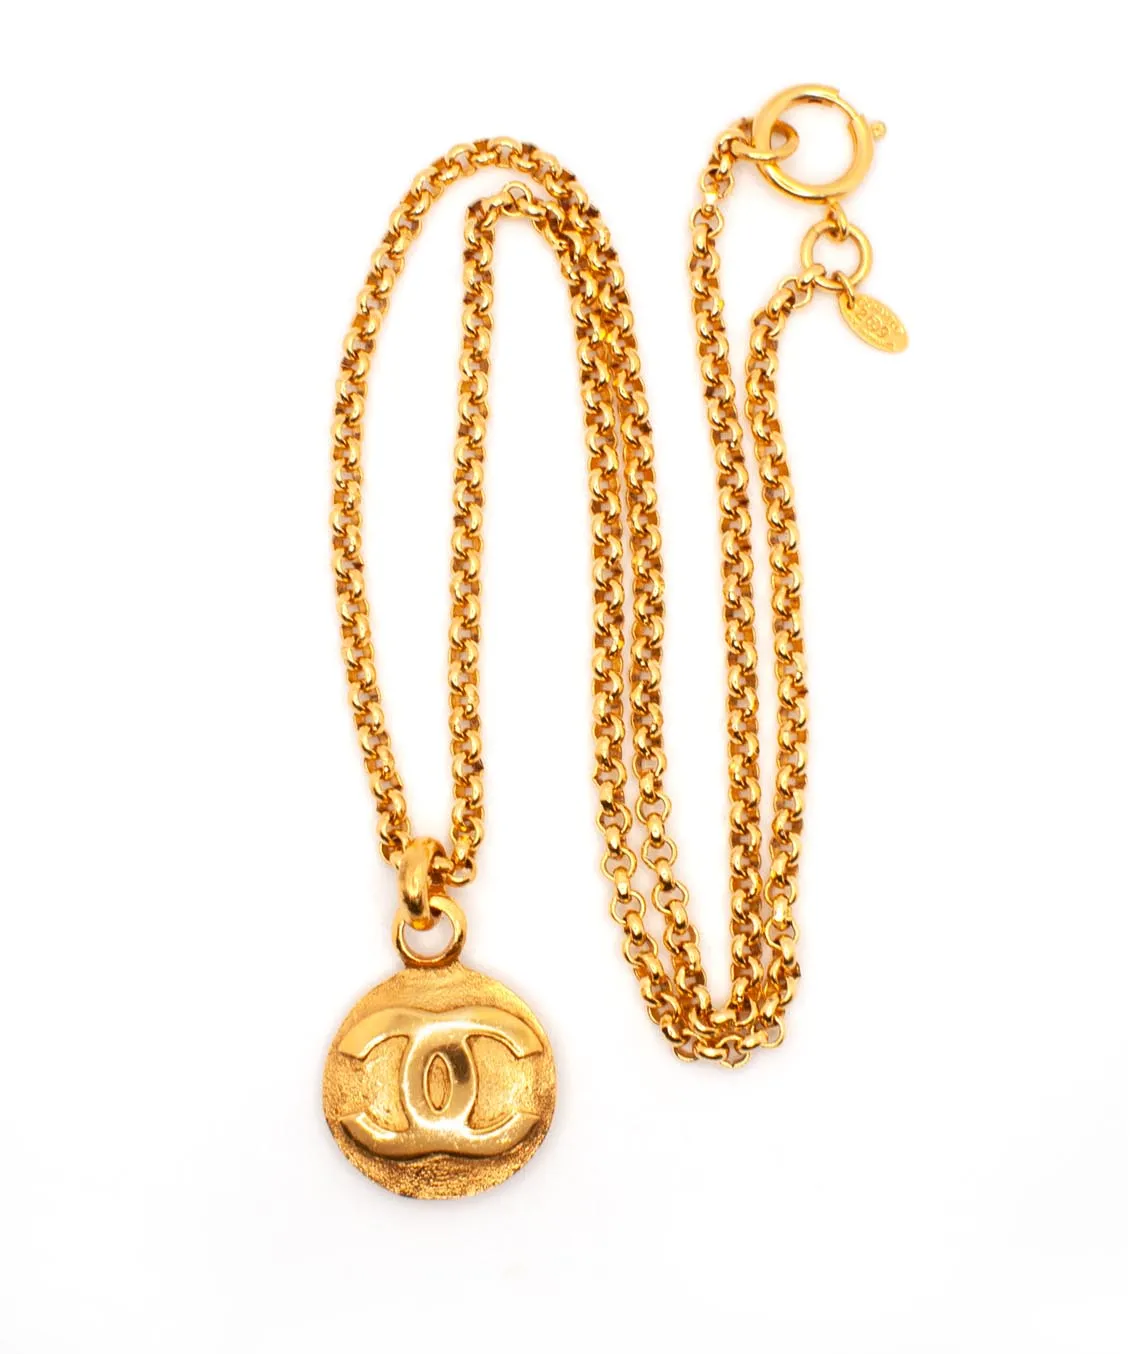 Vintage Chanel logo pendant on long gold-plated belcher chain necklace